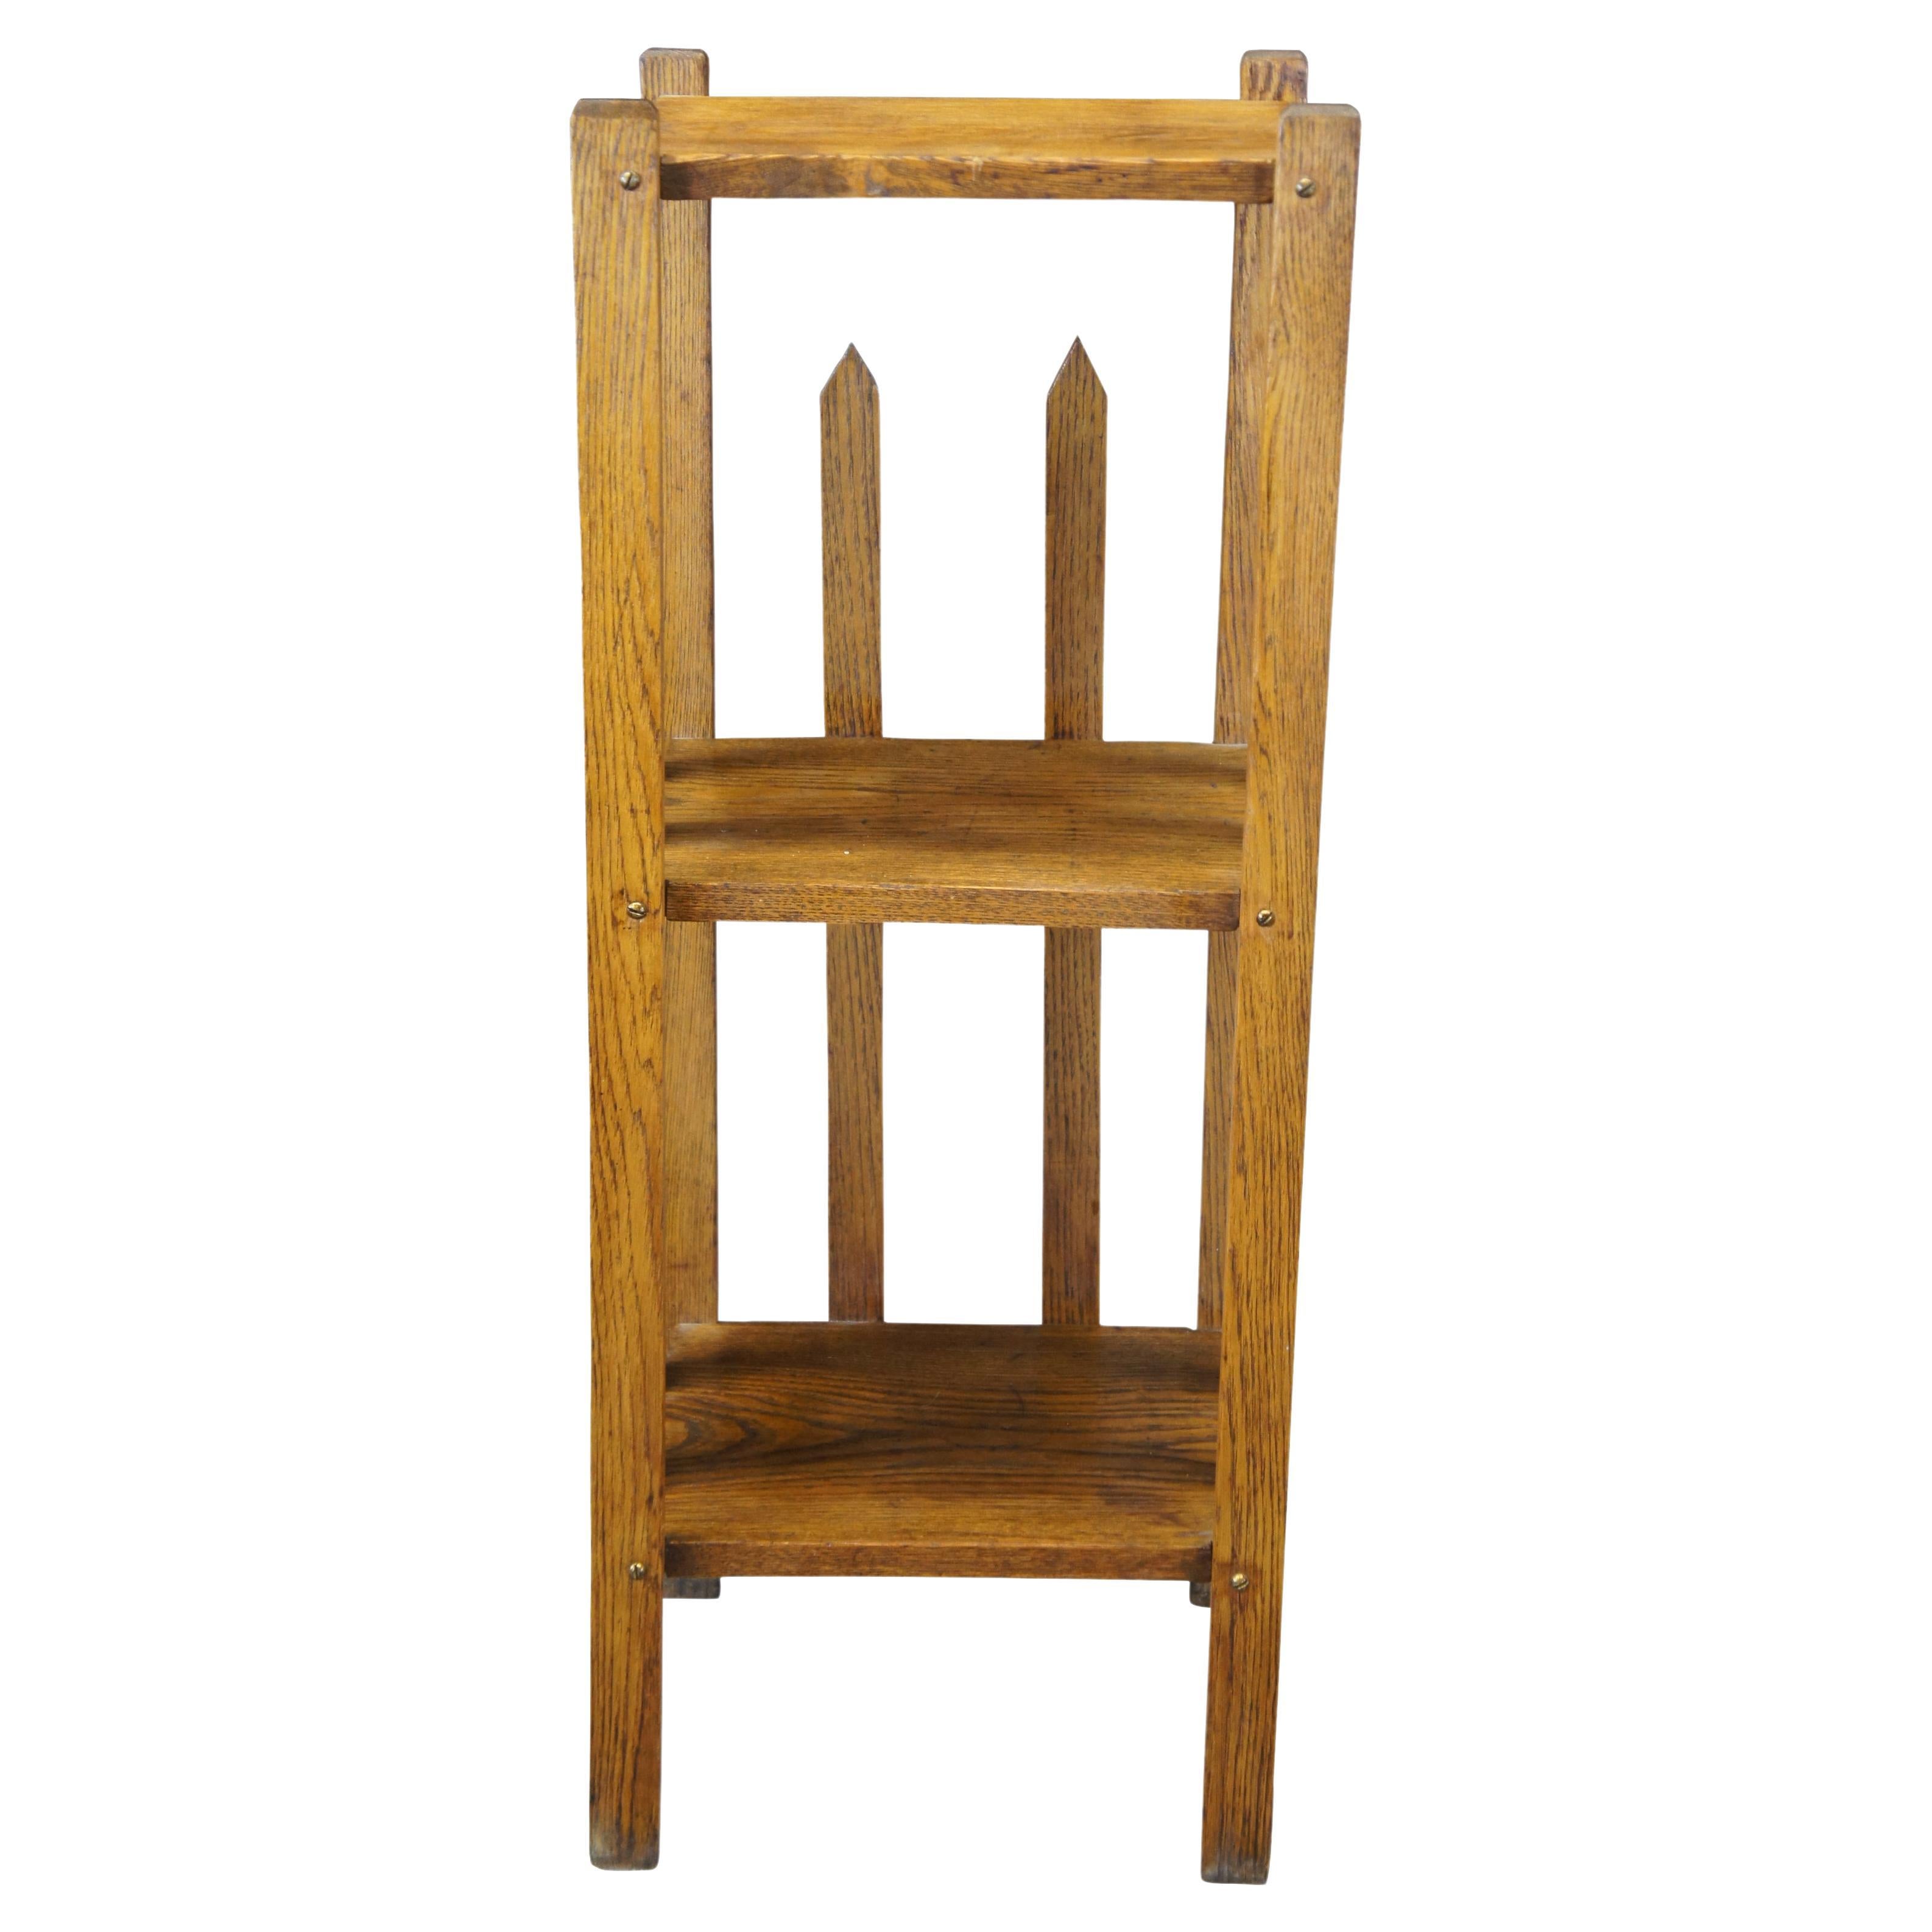 Mid 20th century mission oak 3 tier stand or bookshelf. Features an open design enclosed by spear shaped fence pickets.
     